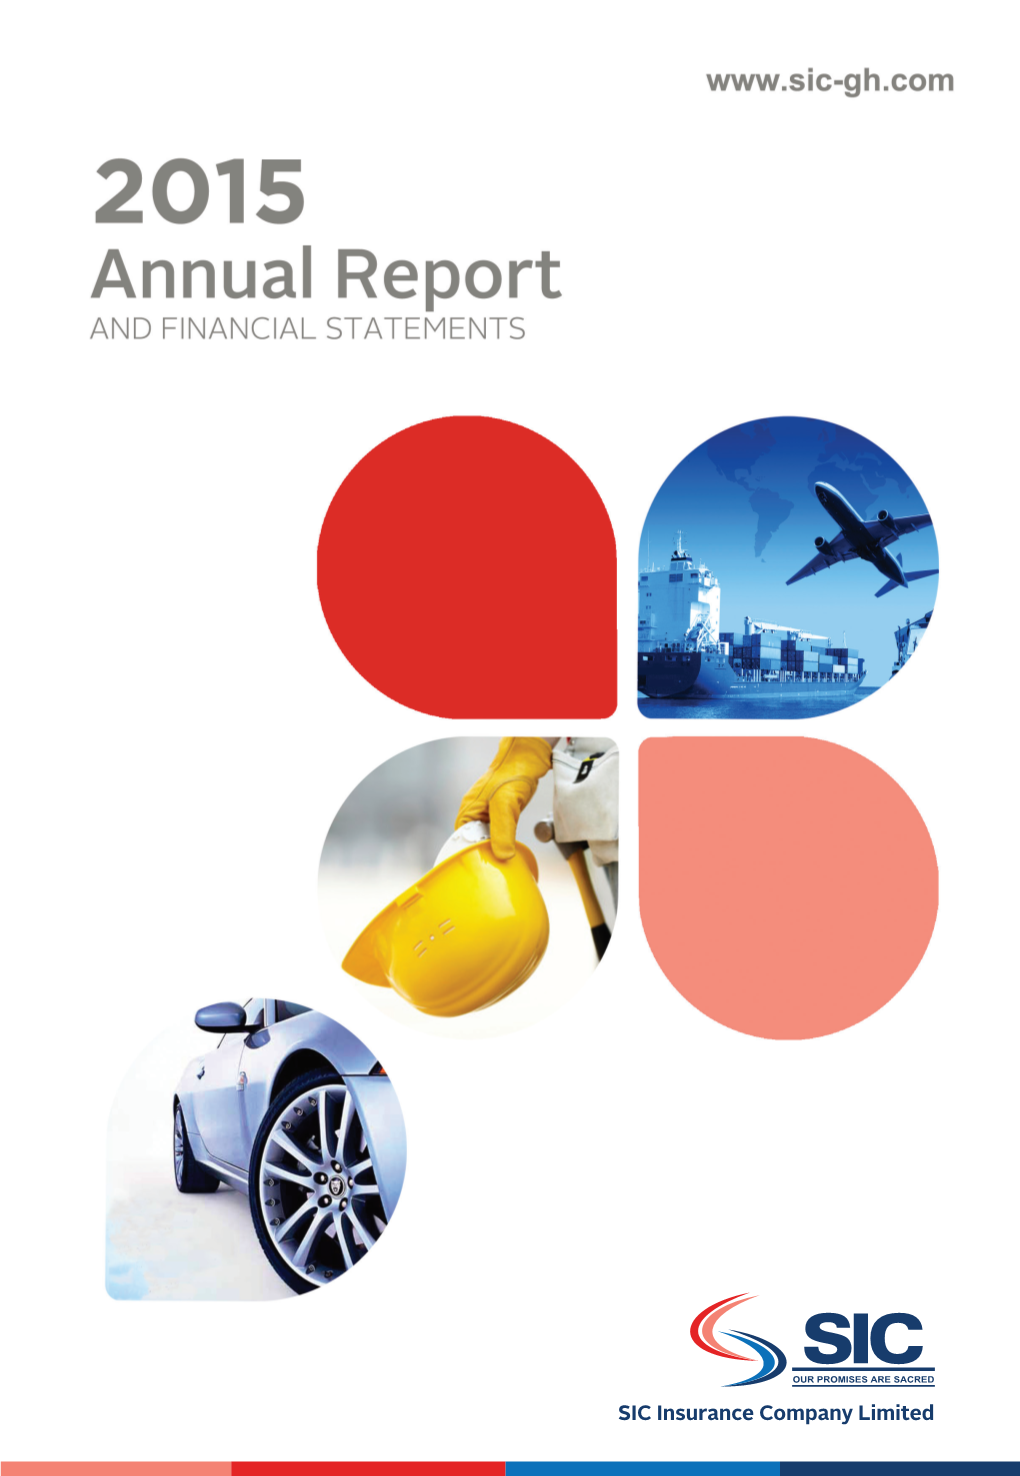 2015 Annual Report & Financial Statement